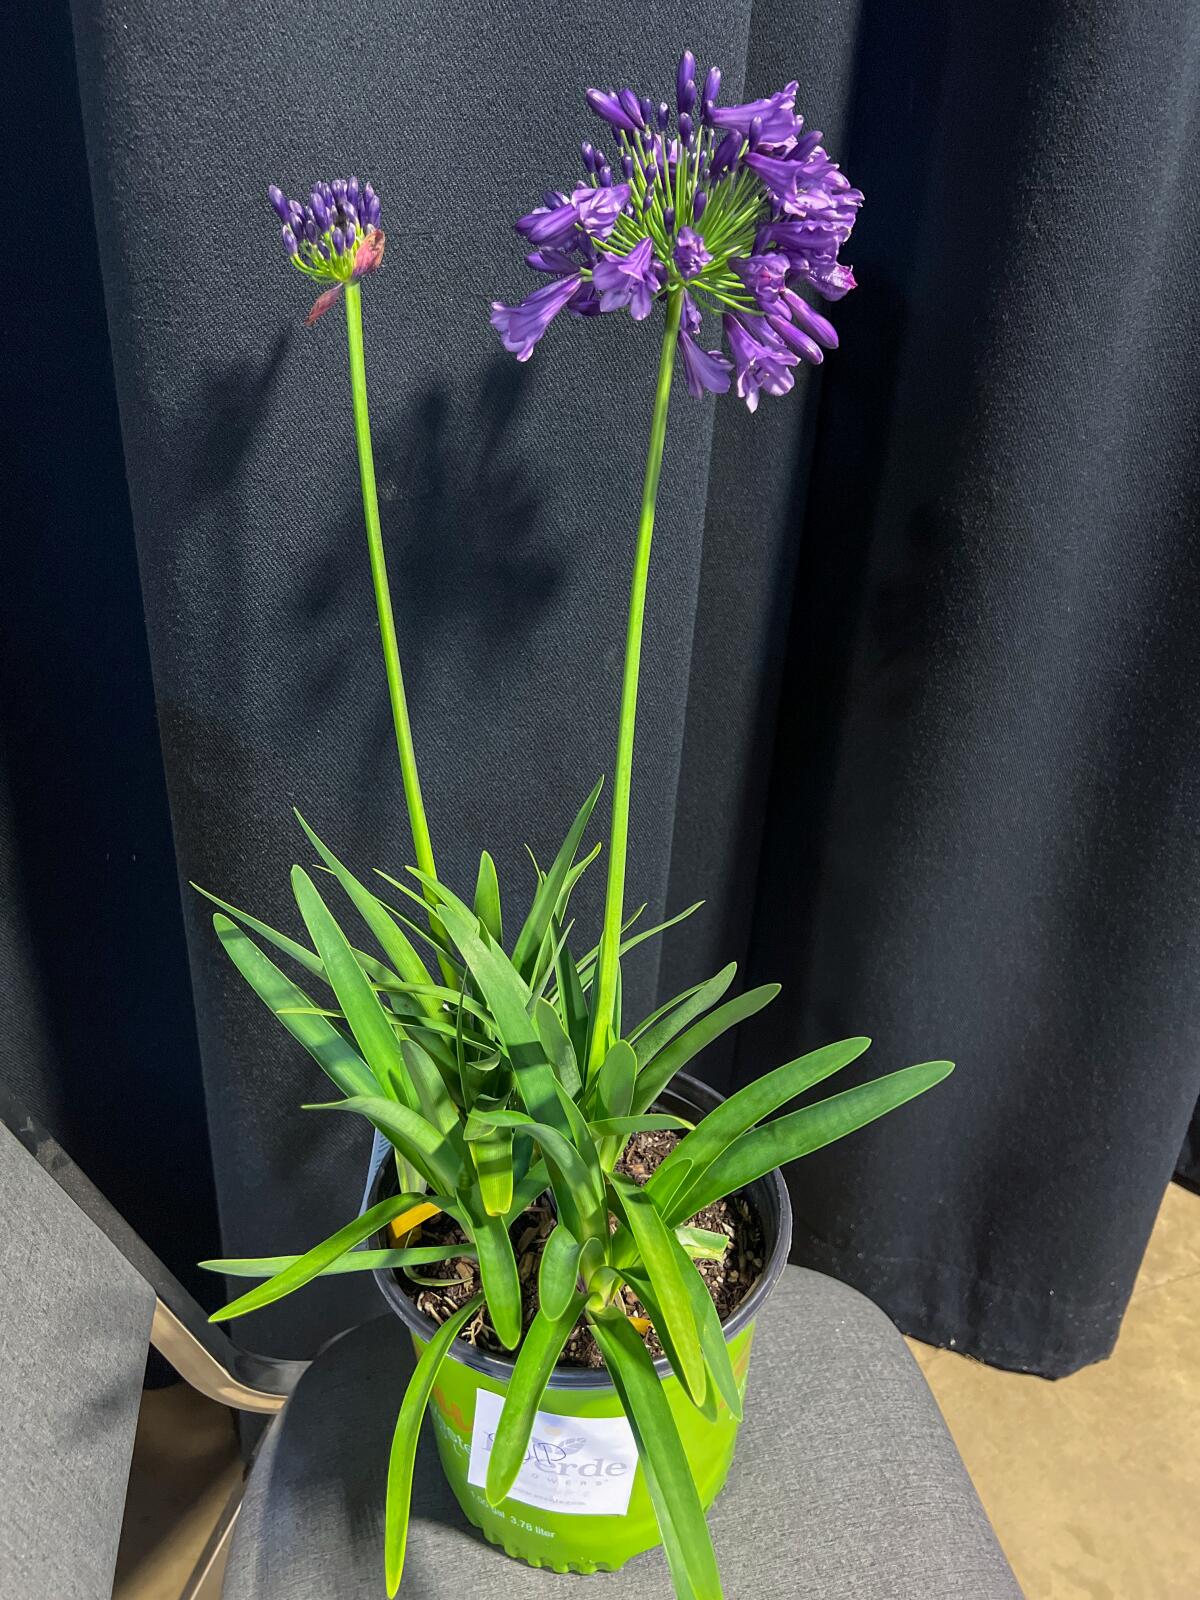 A new kind of agapanthus that blooms in deep purple for eight months a year, with smaller leaves and less invasive  growth